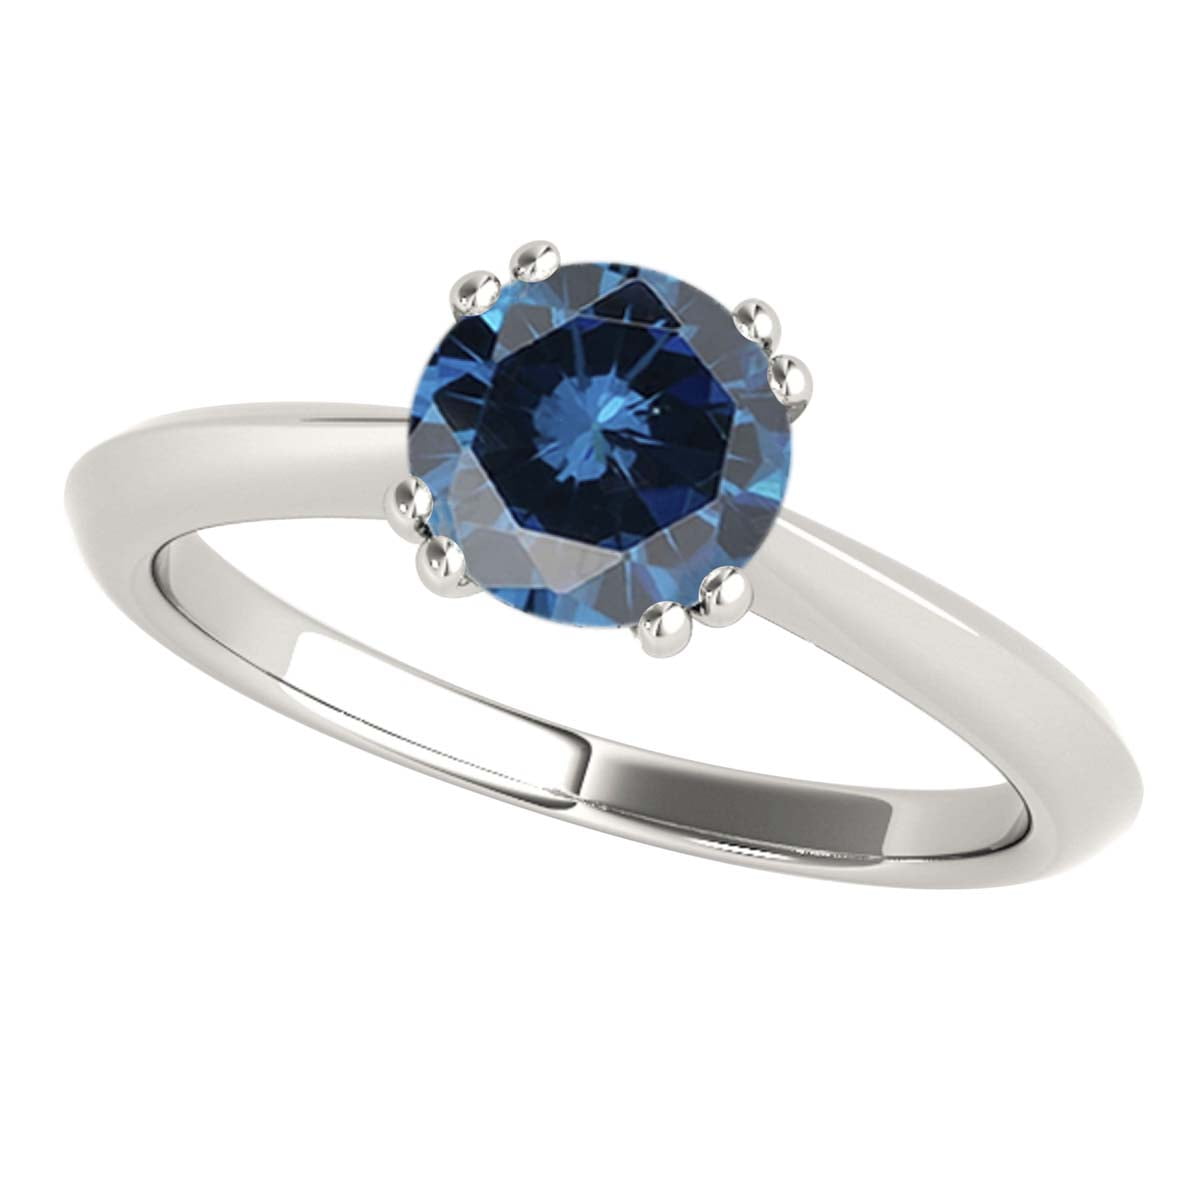 ctw I2-I3 Blue Diamond Ring in 10K White Gold Details about   1/3 Carat 